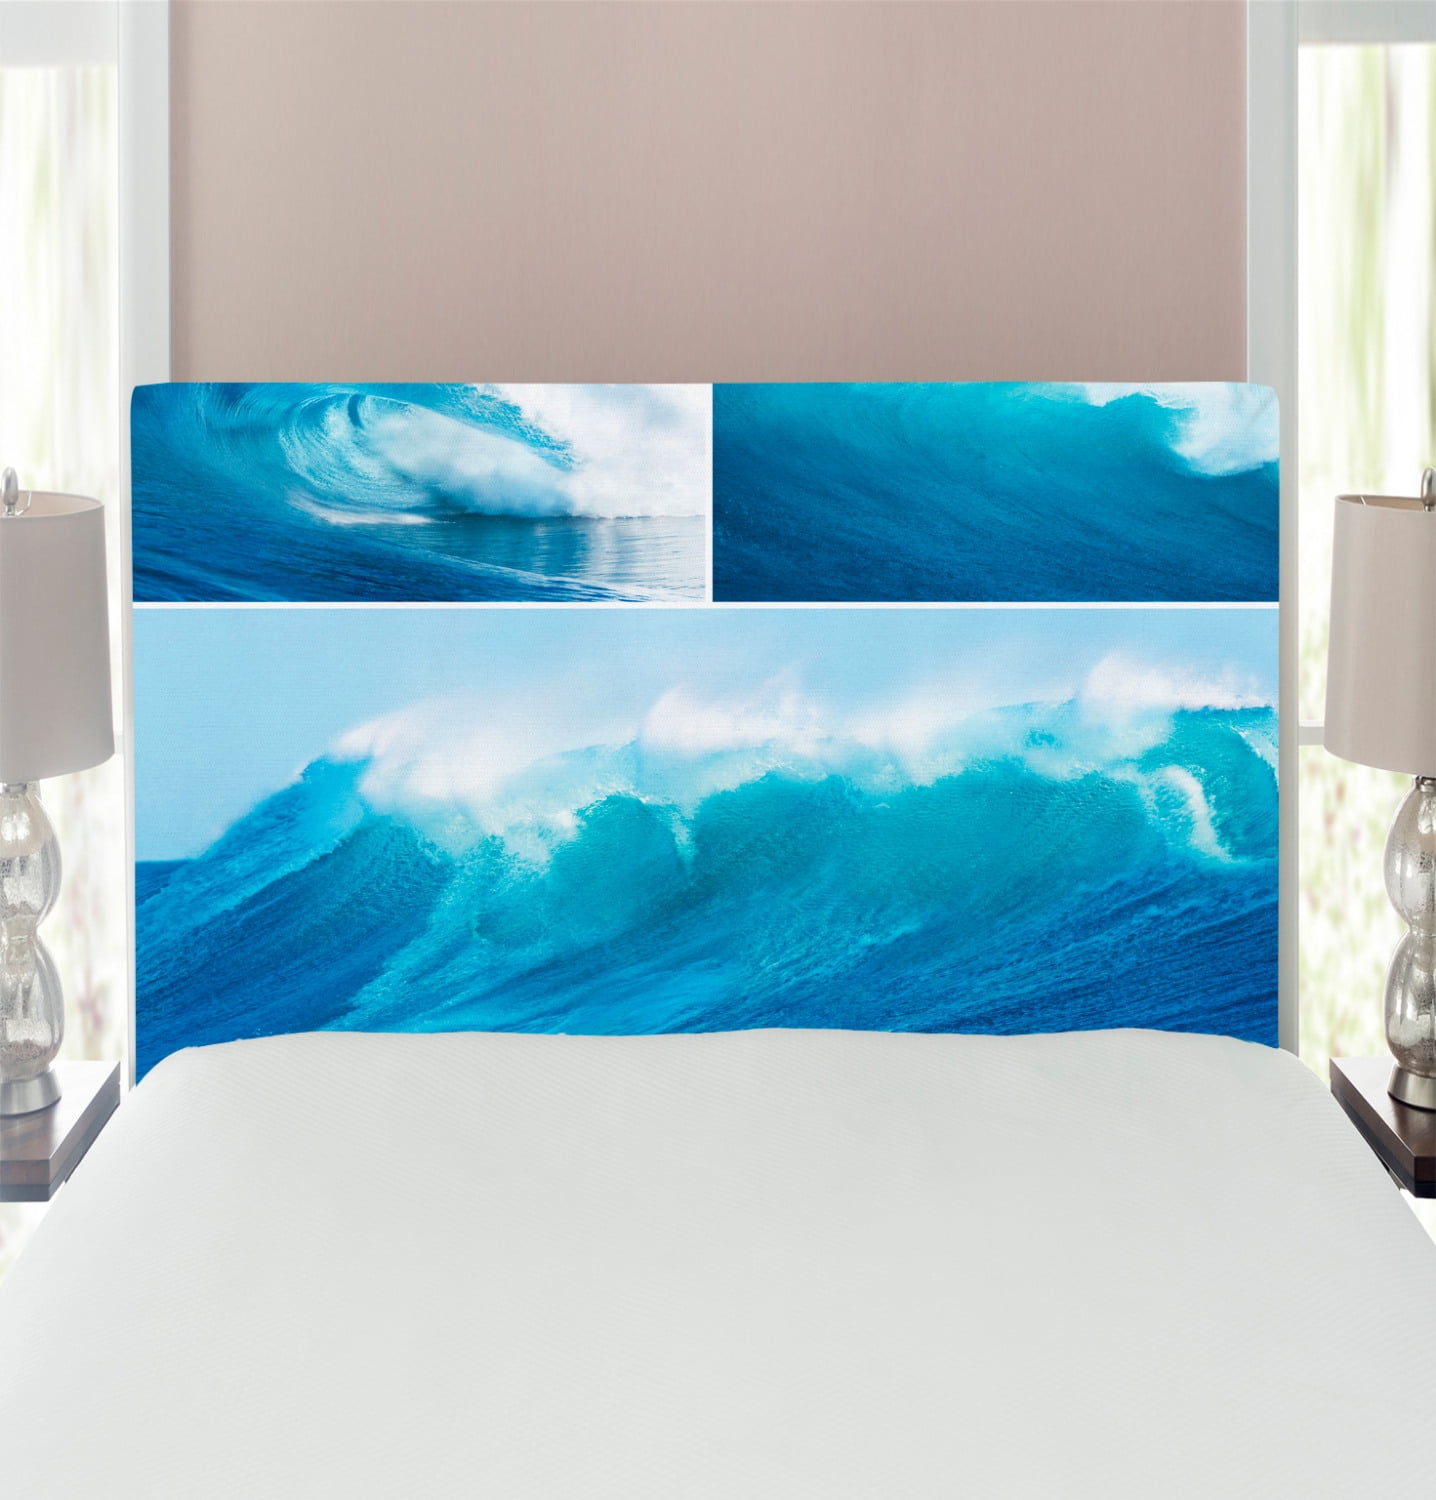 Surf Boards Lampshades Ideal To Match Surfing Duvets Cushions & Surfing Wall Art 